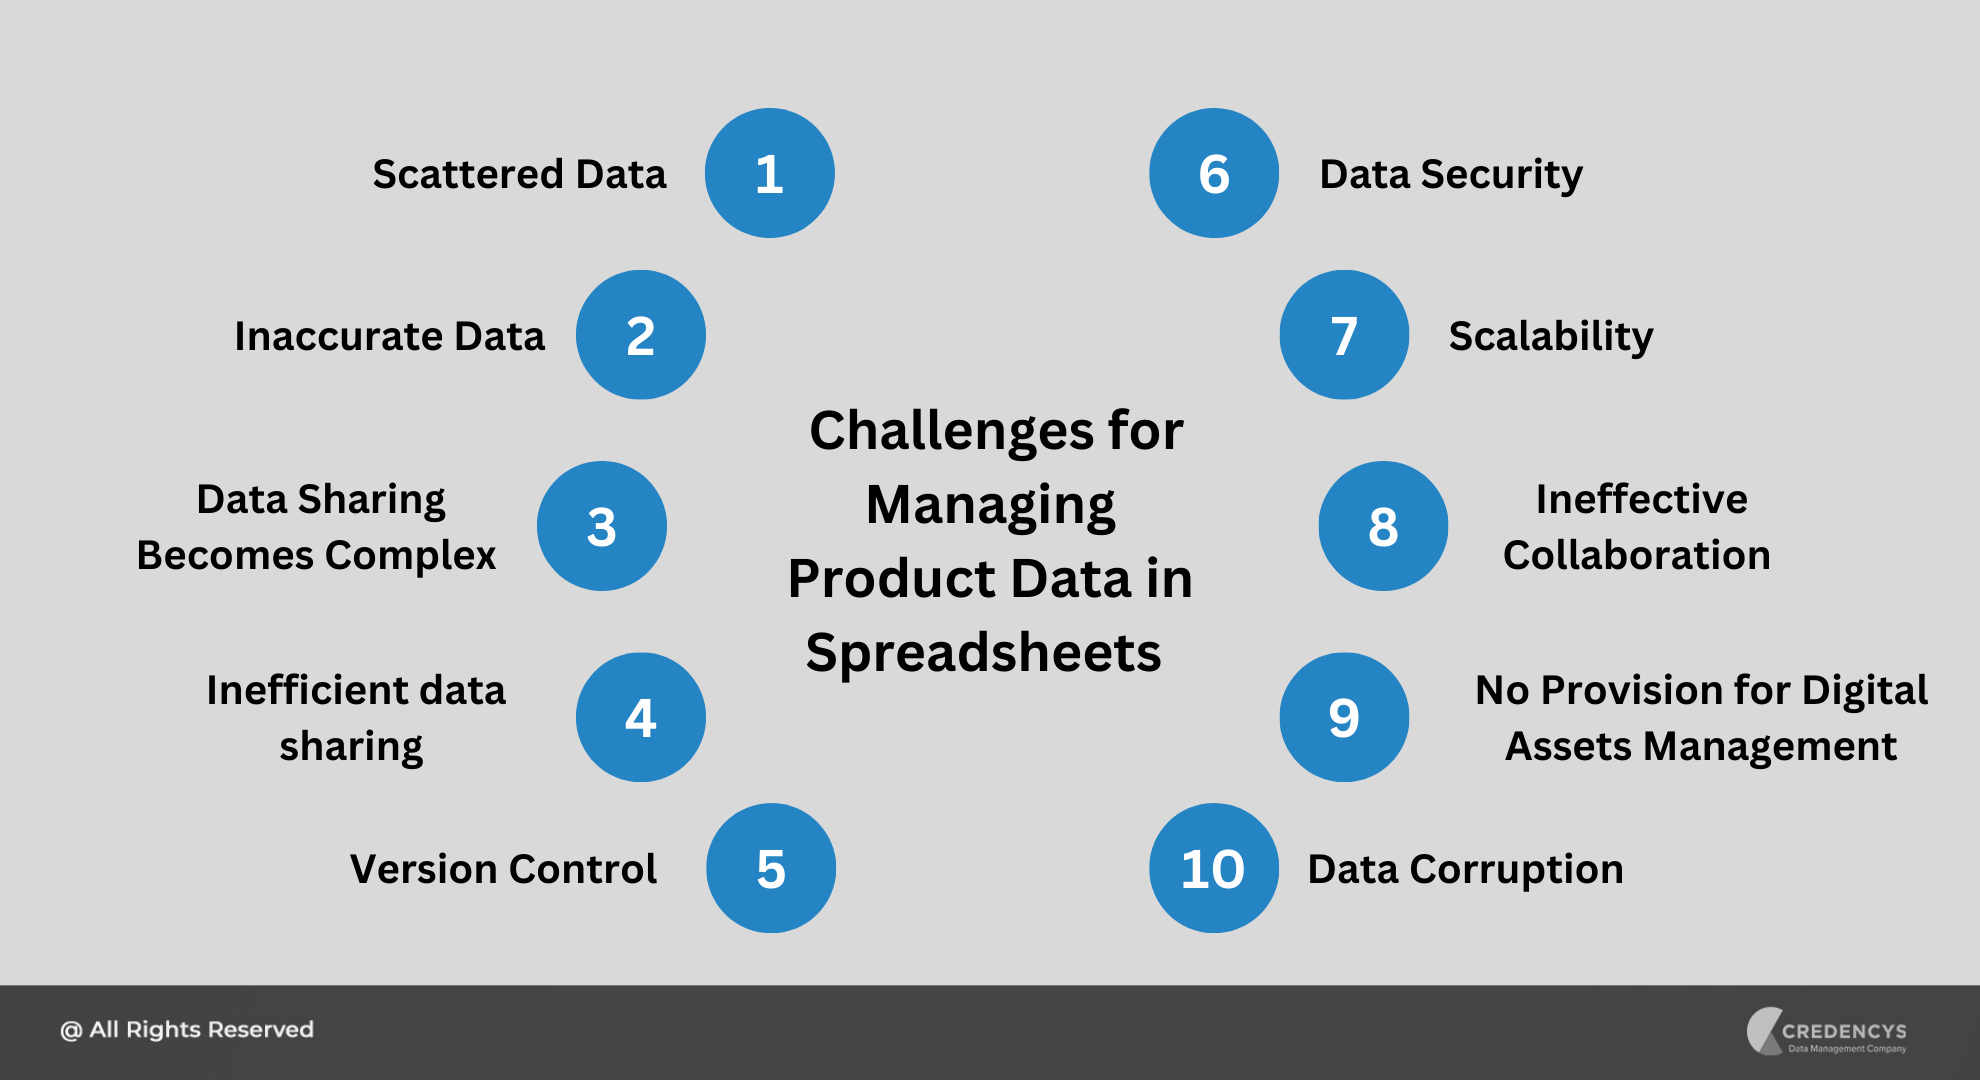 Challenges for Managing Product Data in Spreadsheets